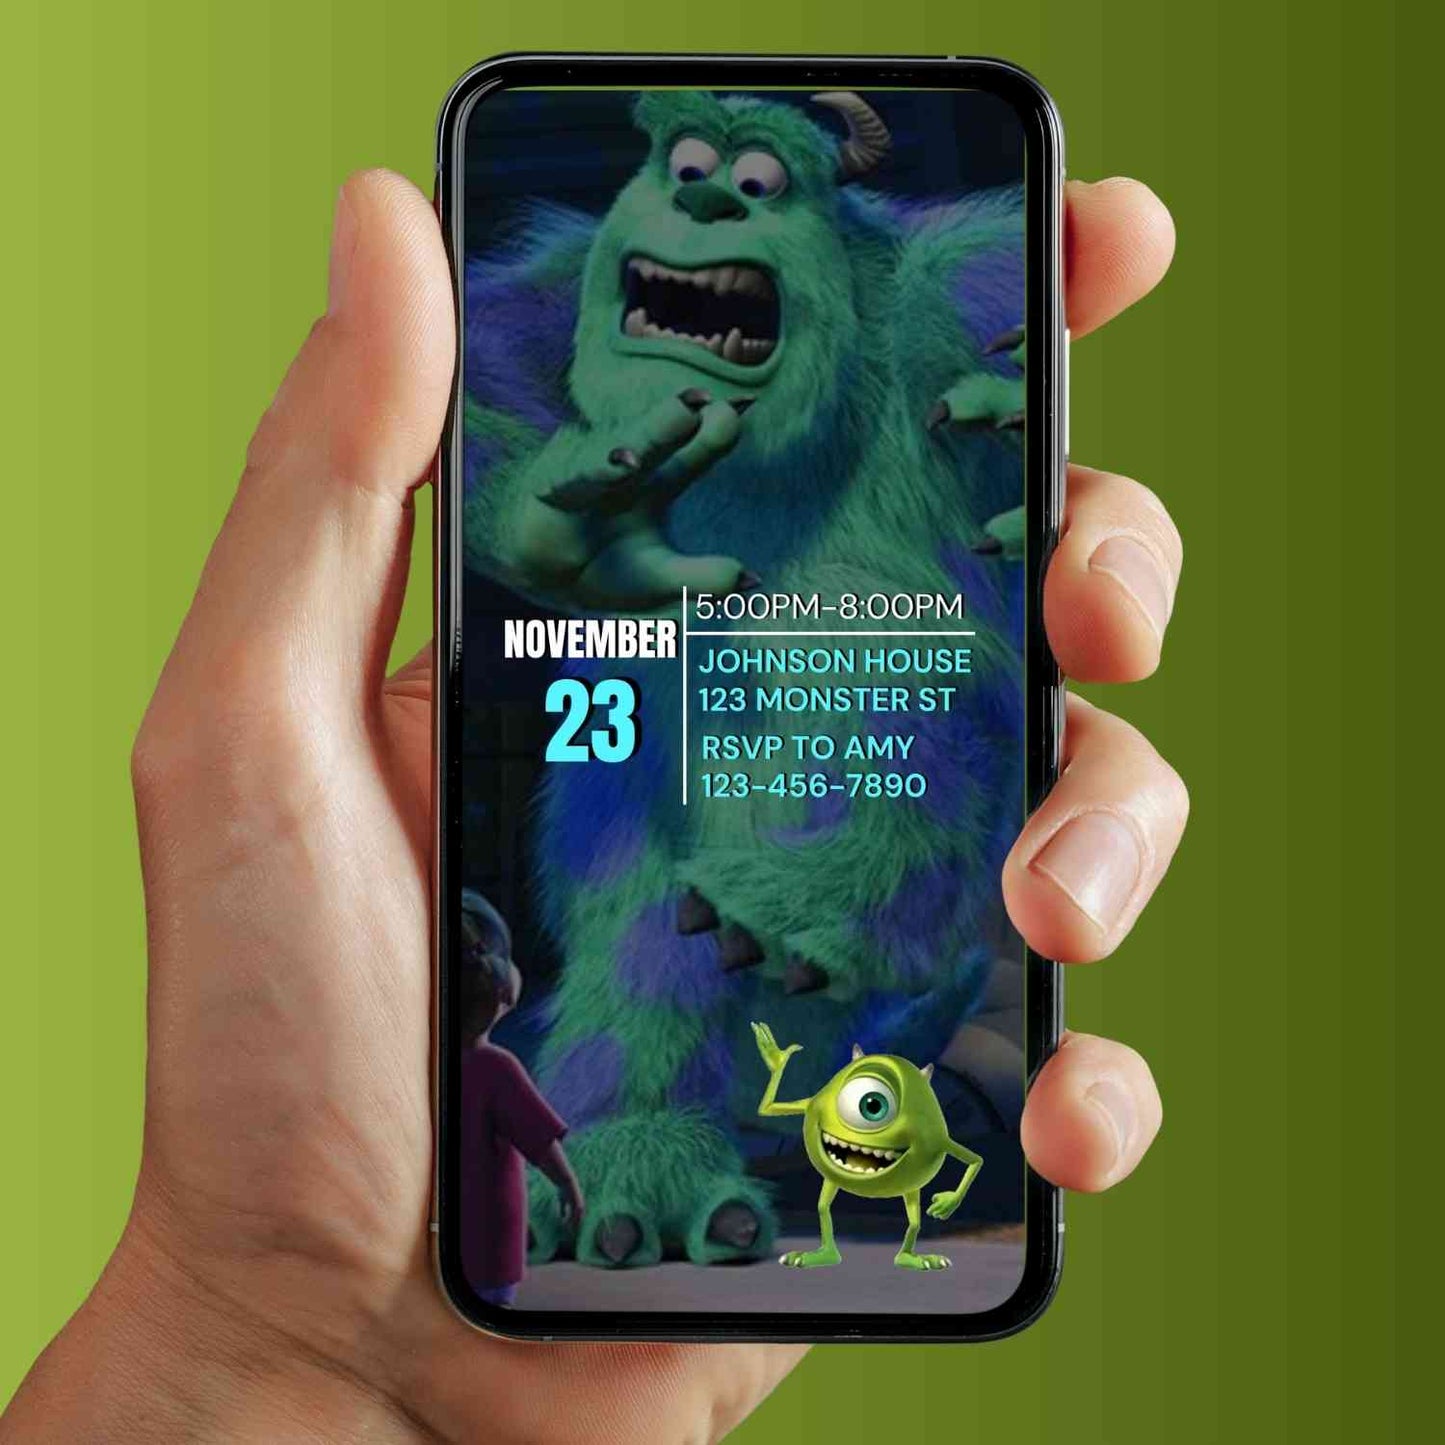 Monsters Inc Animated Birthday Video Invitation | Personalized and Fun